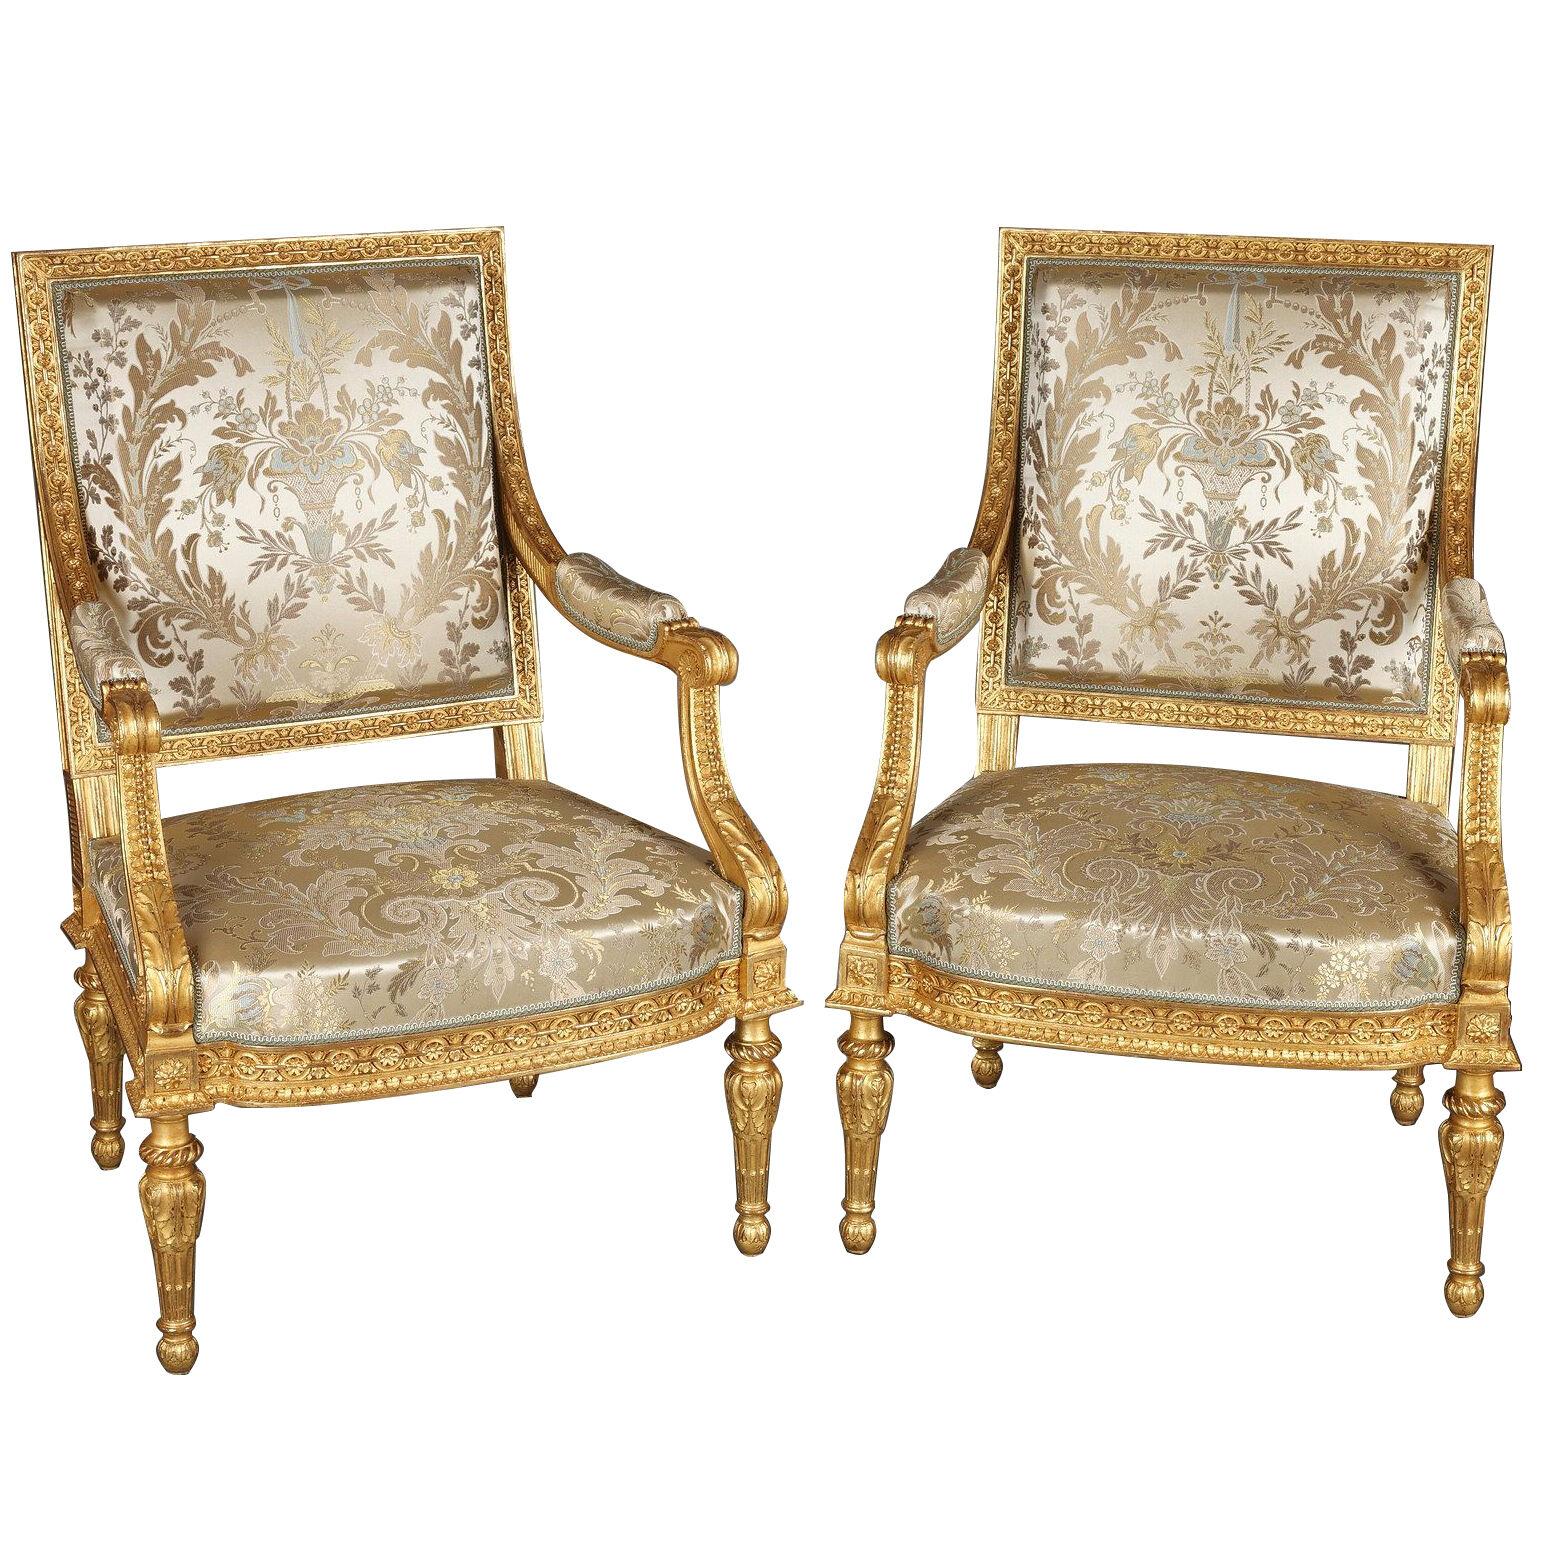 Pair of Louis XVI Style Giltwood Armchairs After G. Jacob, France, Circa 1880